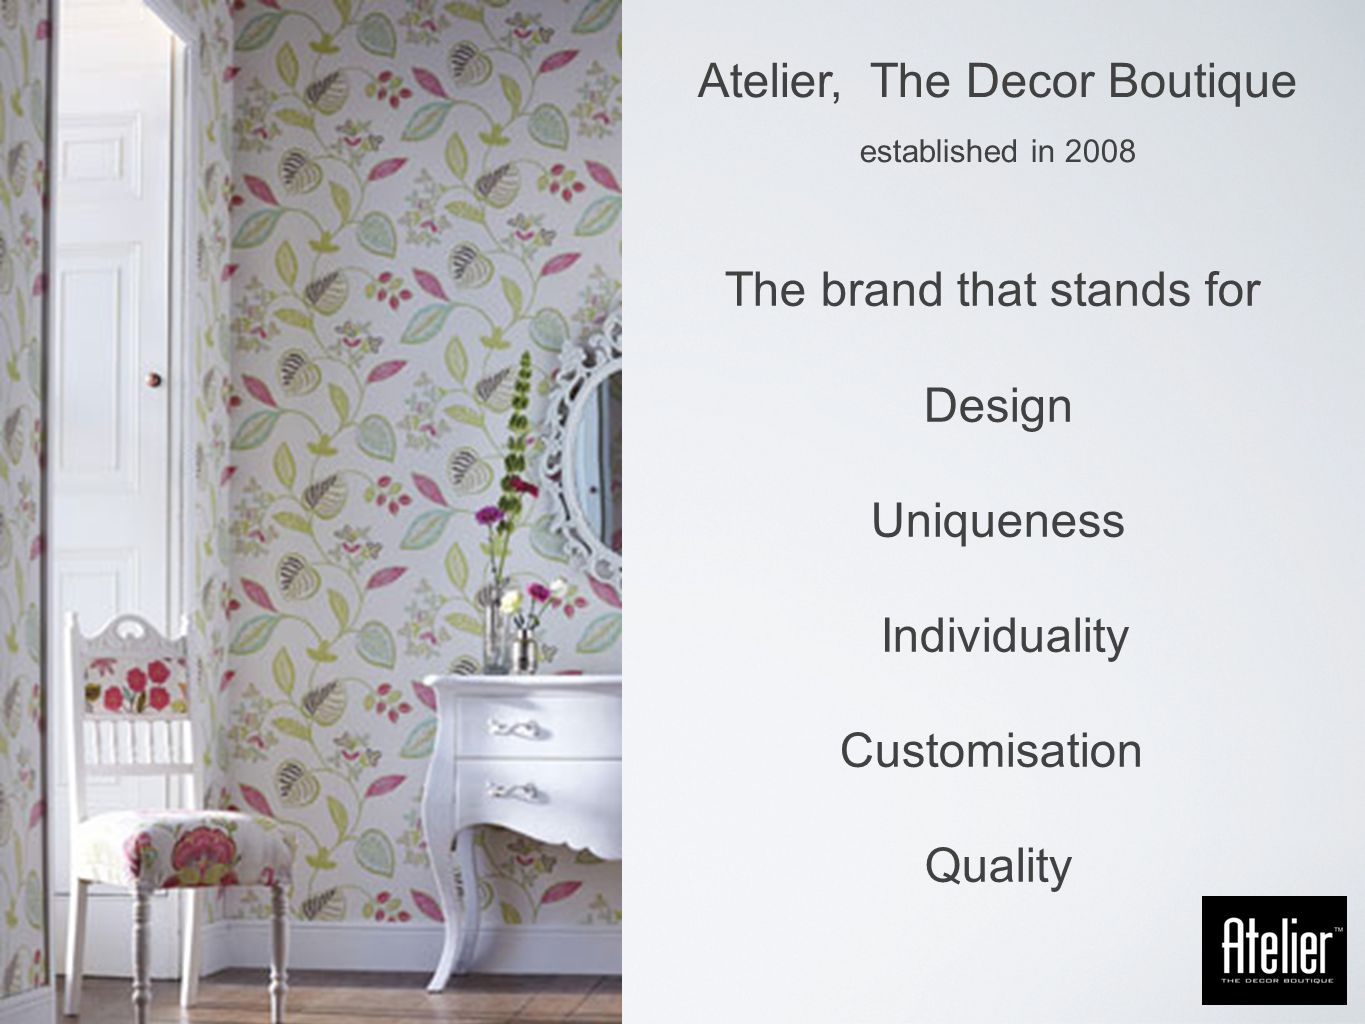 Atelier, The Decor Boutique established in 2008 The brand that stands for Design Uniqueness Individuality Customisation Quality